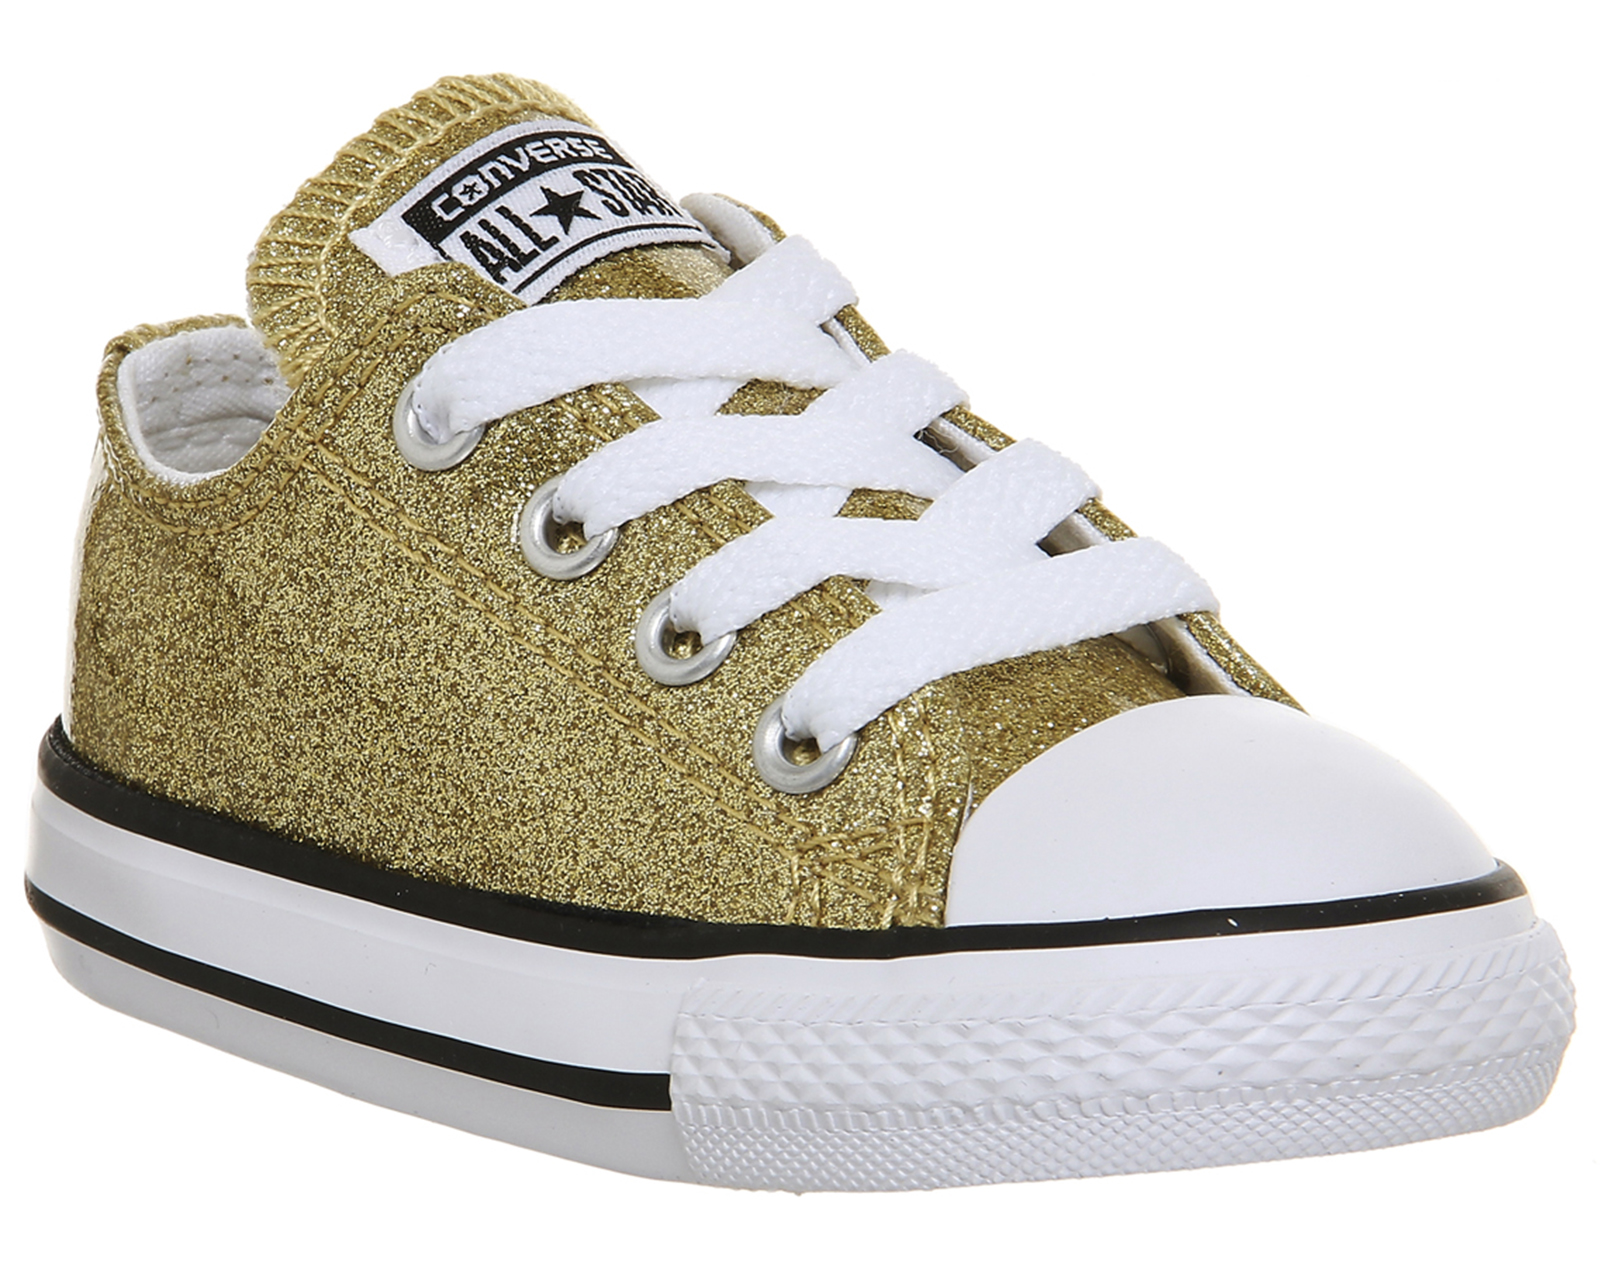 Converse All Star Low Infant Gold Glitter - Unisex